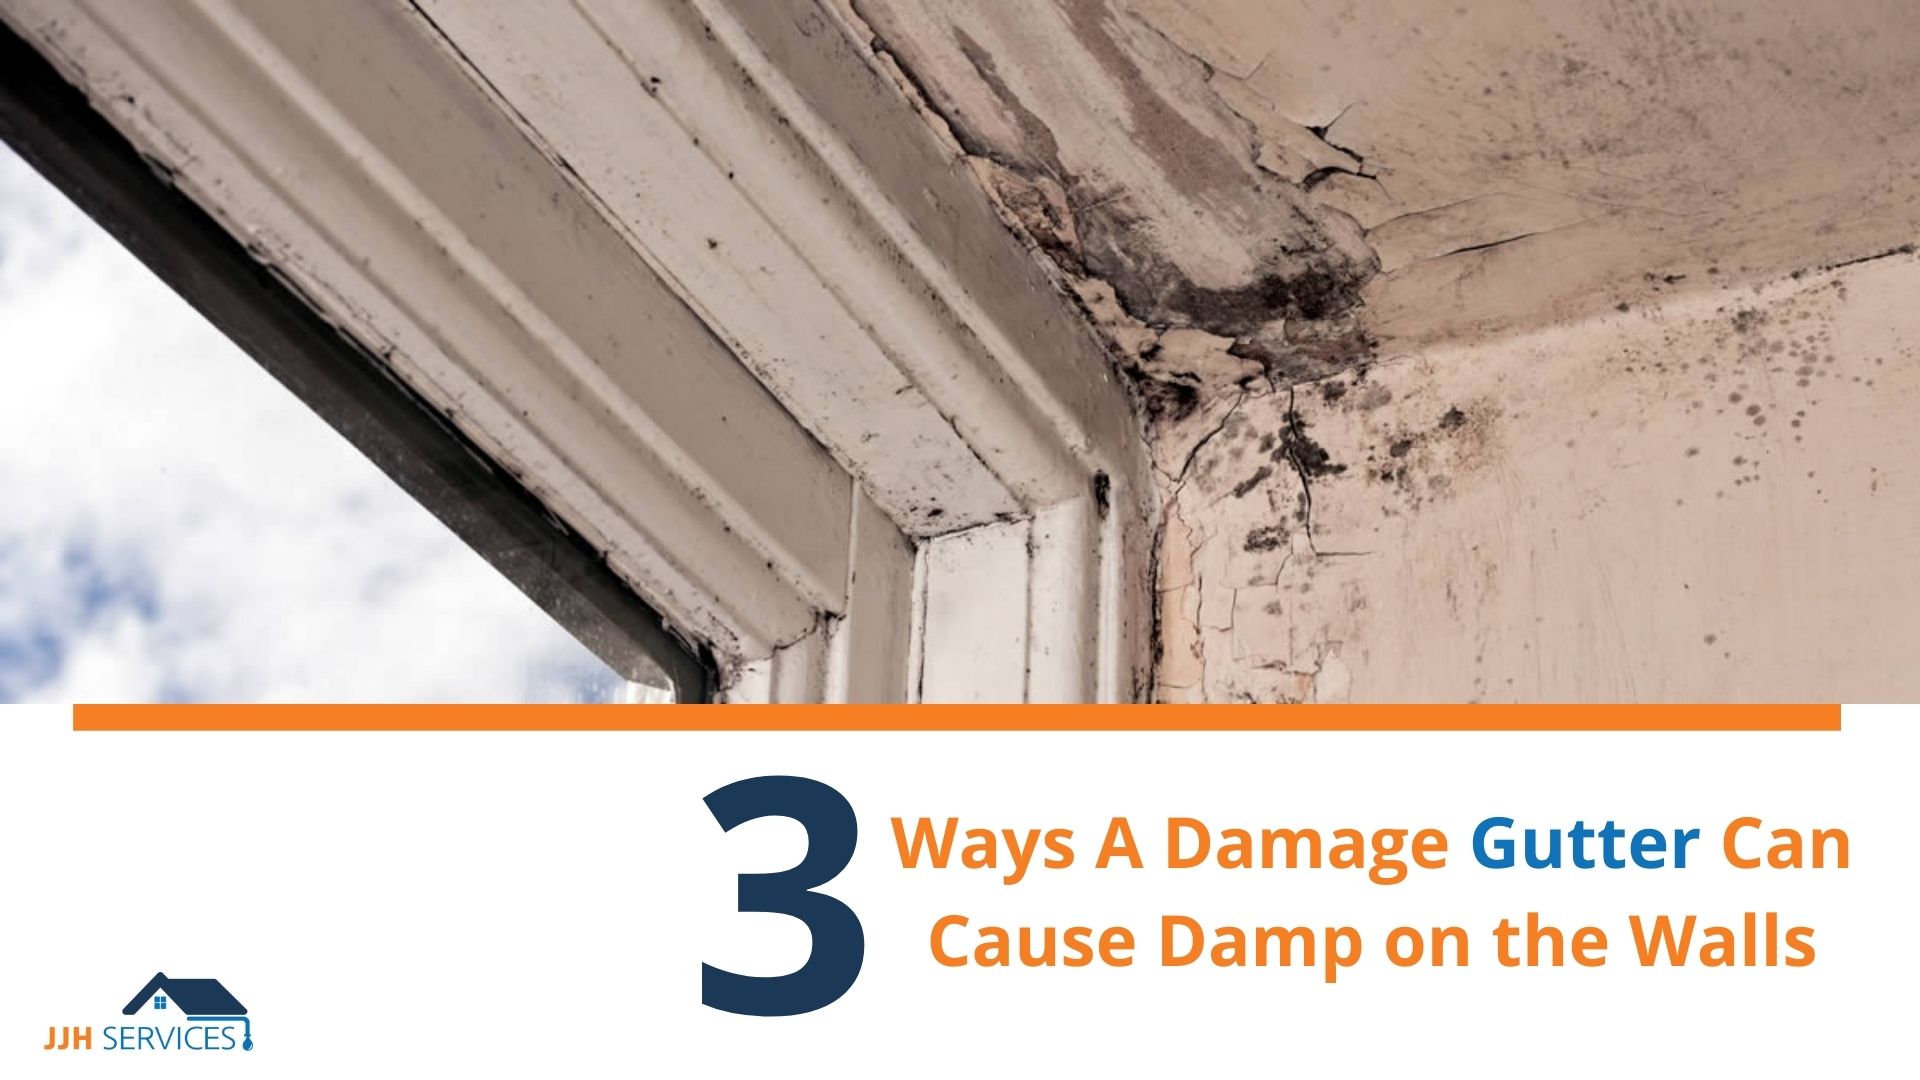 3 Ways A Damage Gutter Can Cause Damp on the Walls